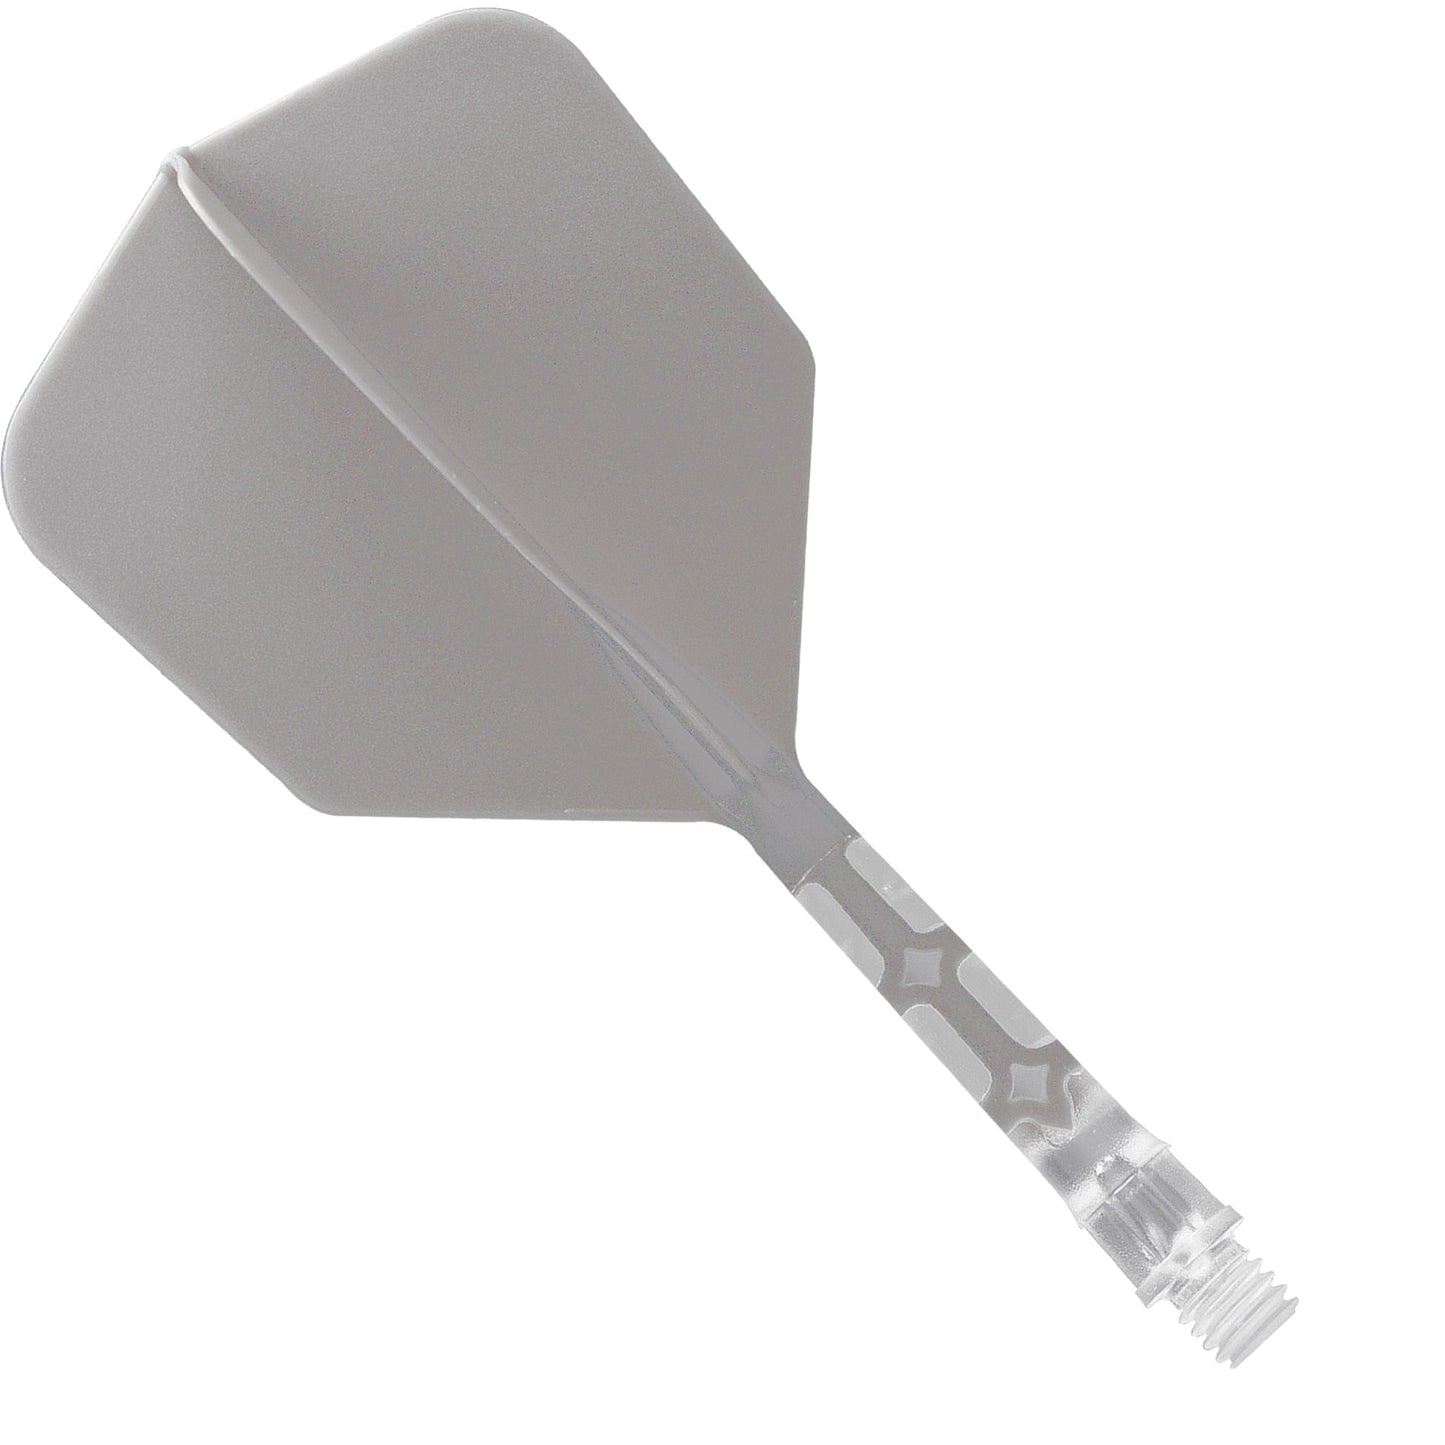 Cuesoul Rost T19 Integrated Dart Shaft and Flights - Big Wing - Clear with Grey Flight Medium